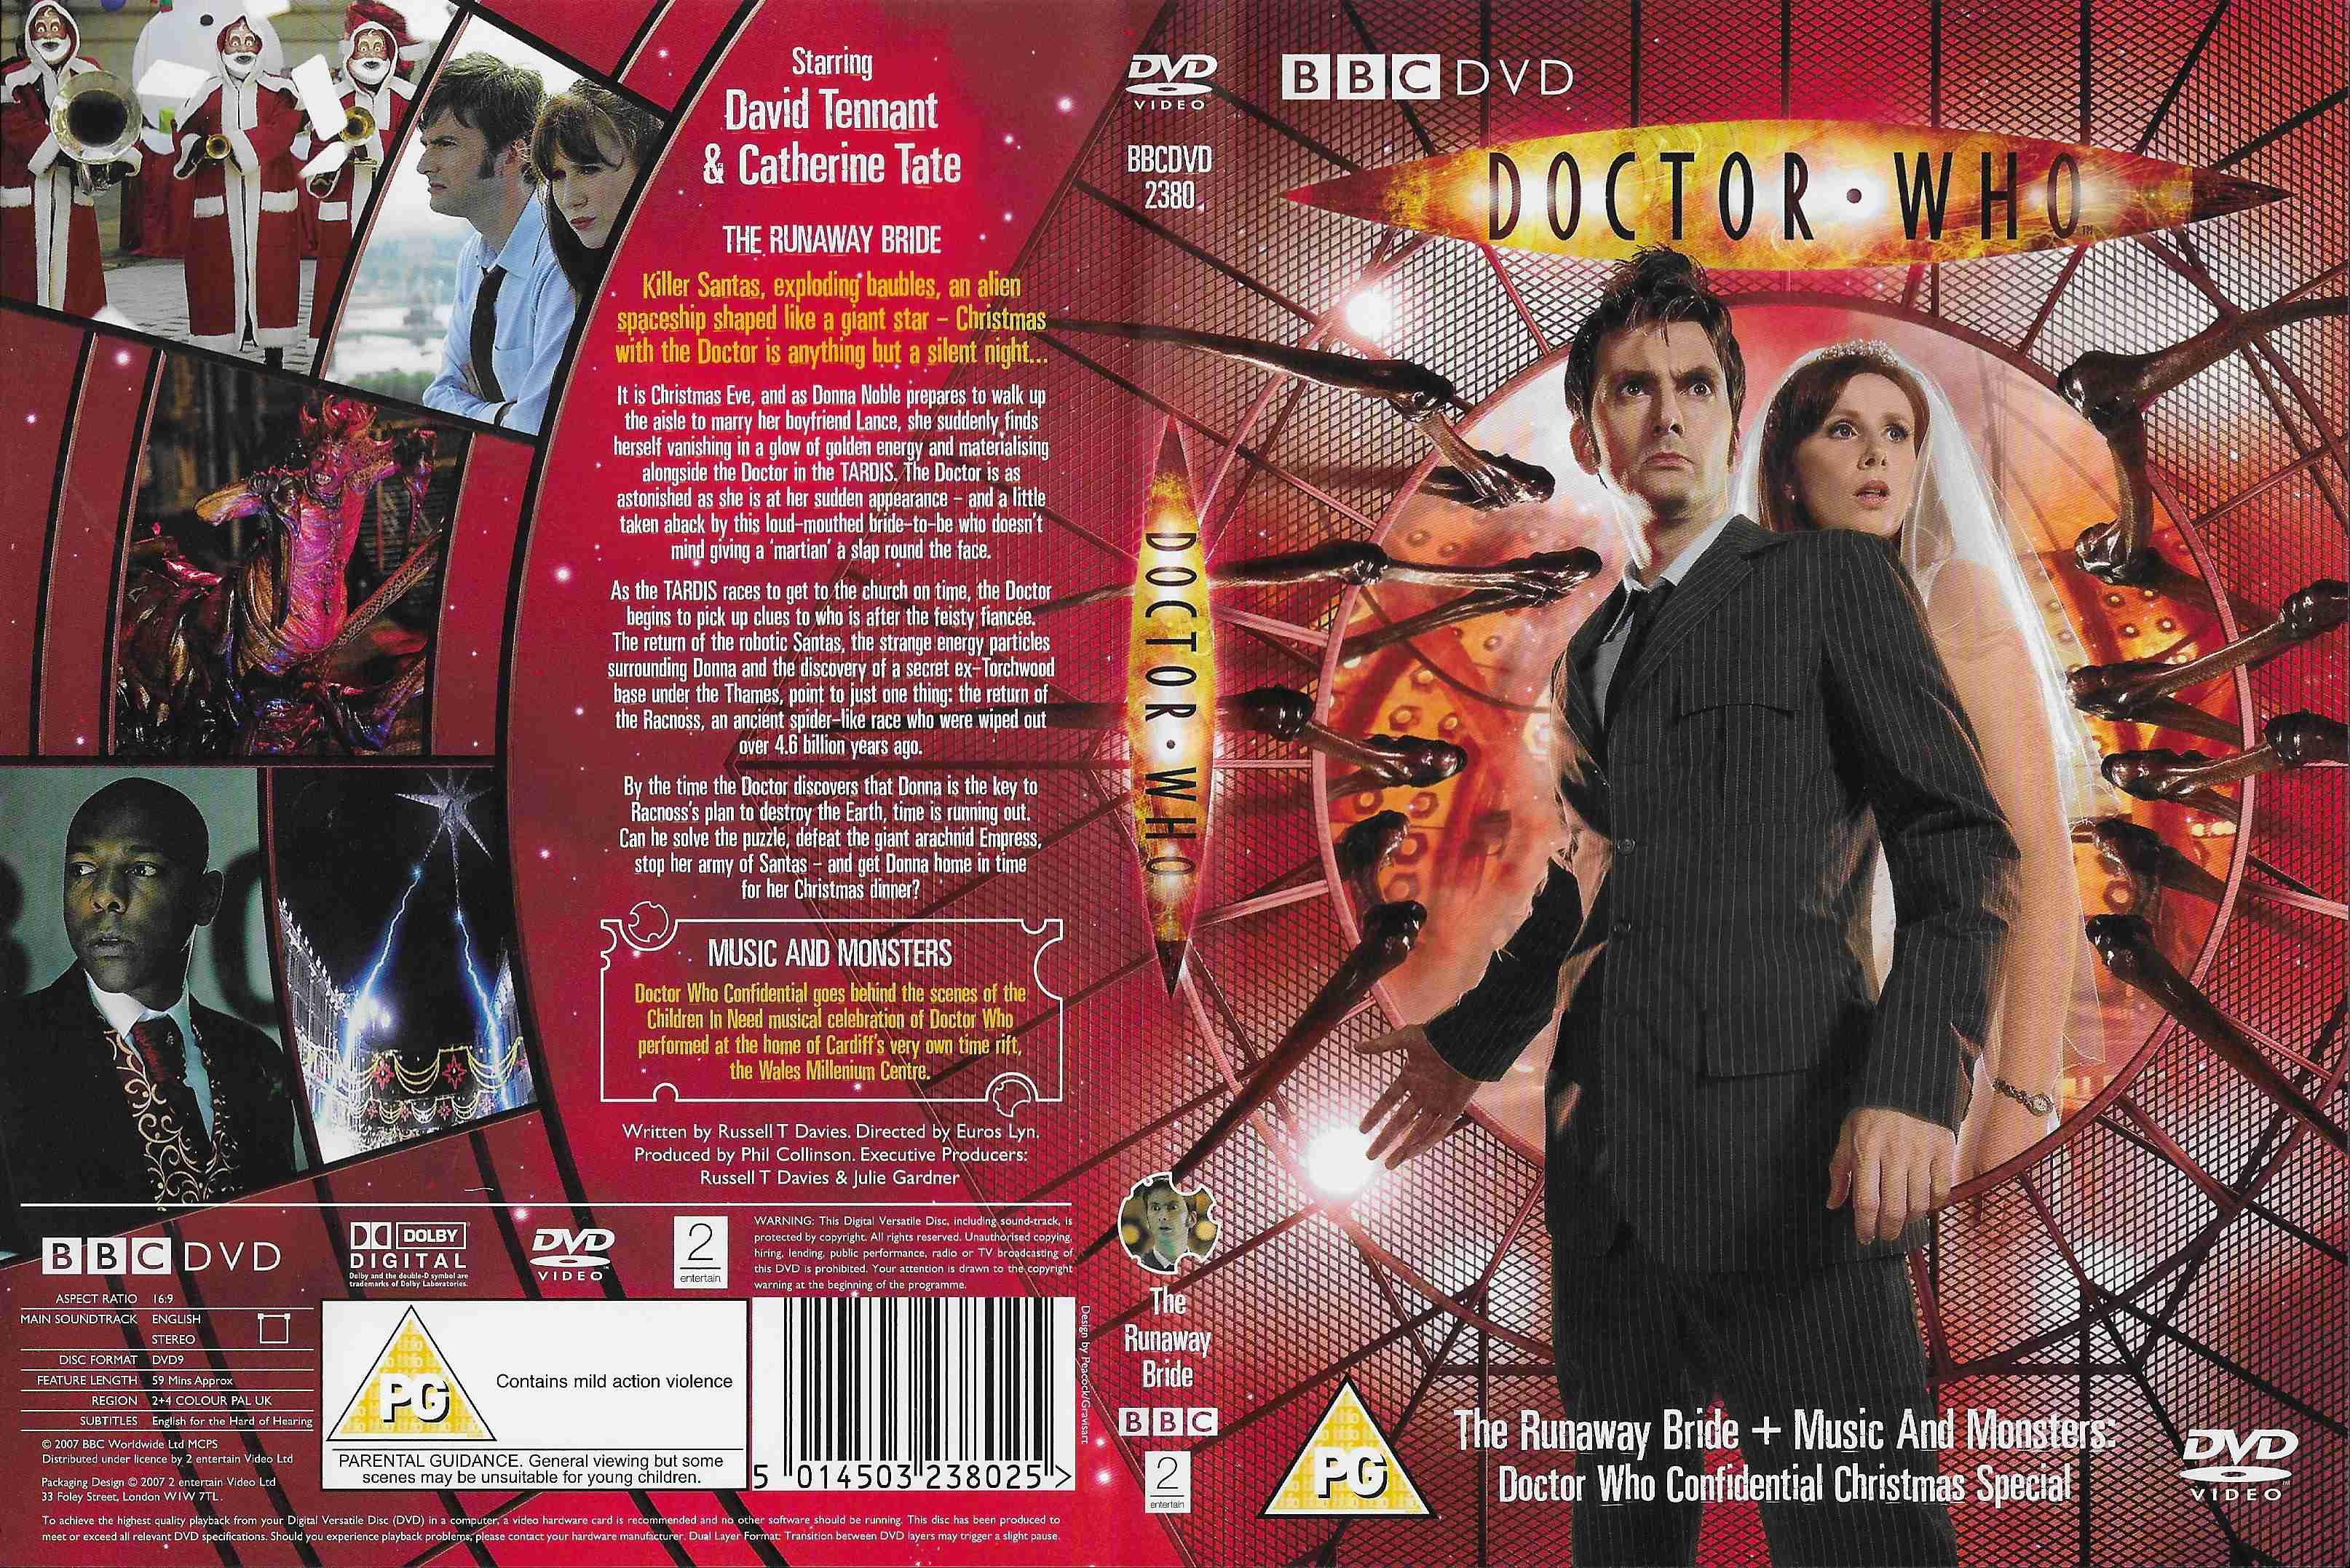 Picture of BBCDVD 2380 Doctor Who - Series 2, the runaway bride by artist Russell T Davies from the BBC records and Tapes library